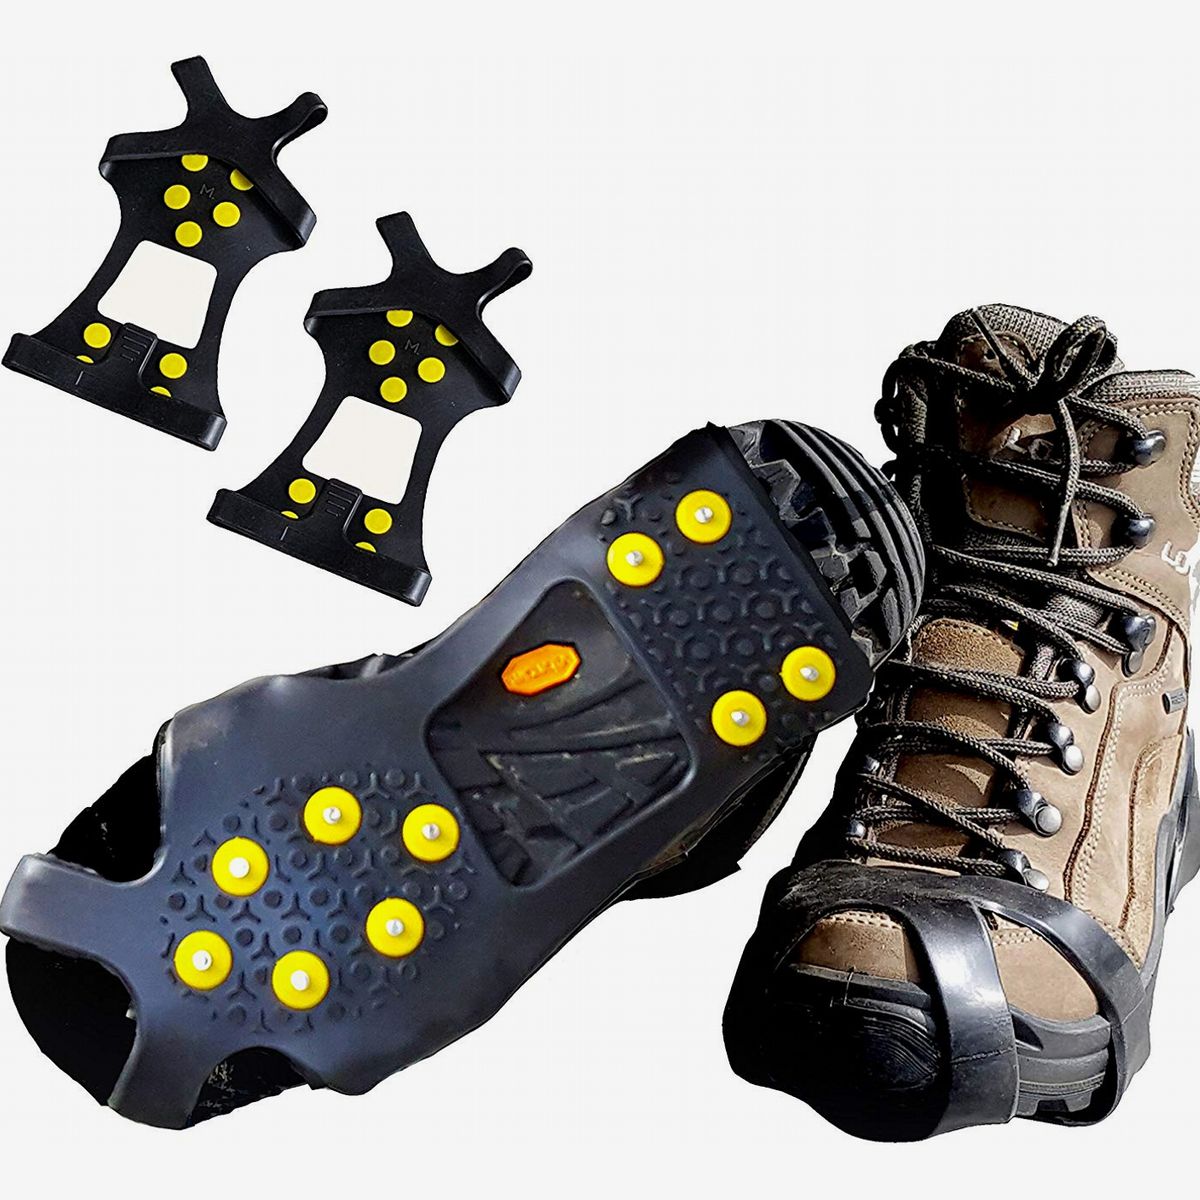 Grenhaven shoe spikes grips claws crampons ice cleats studs snow with 5 studded metal tips 